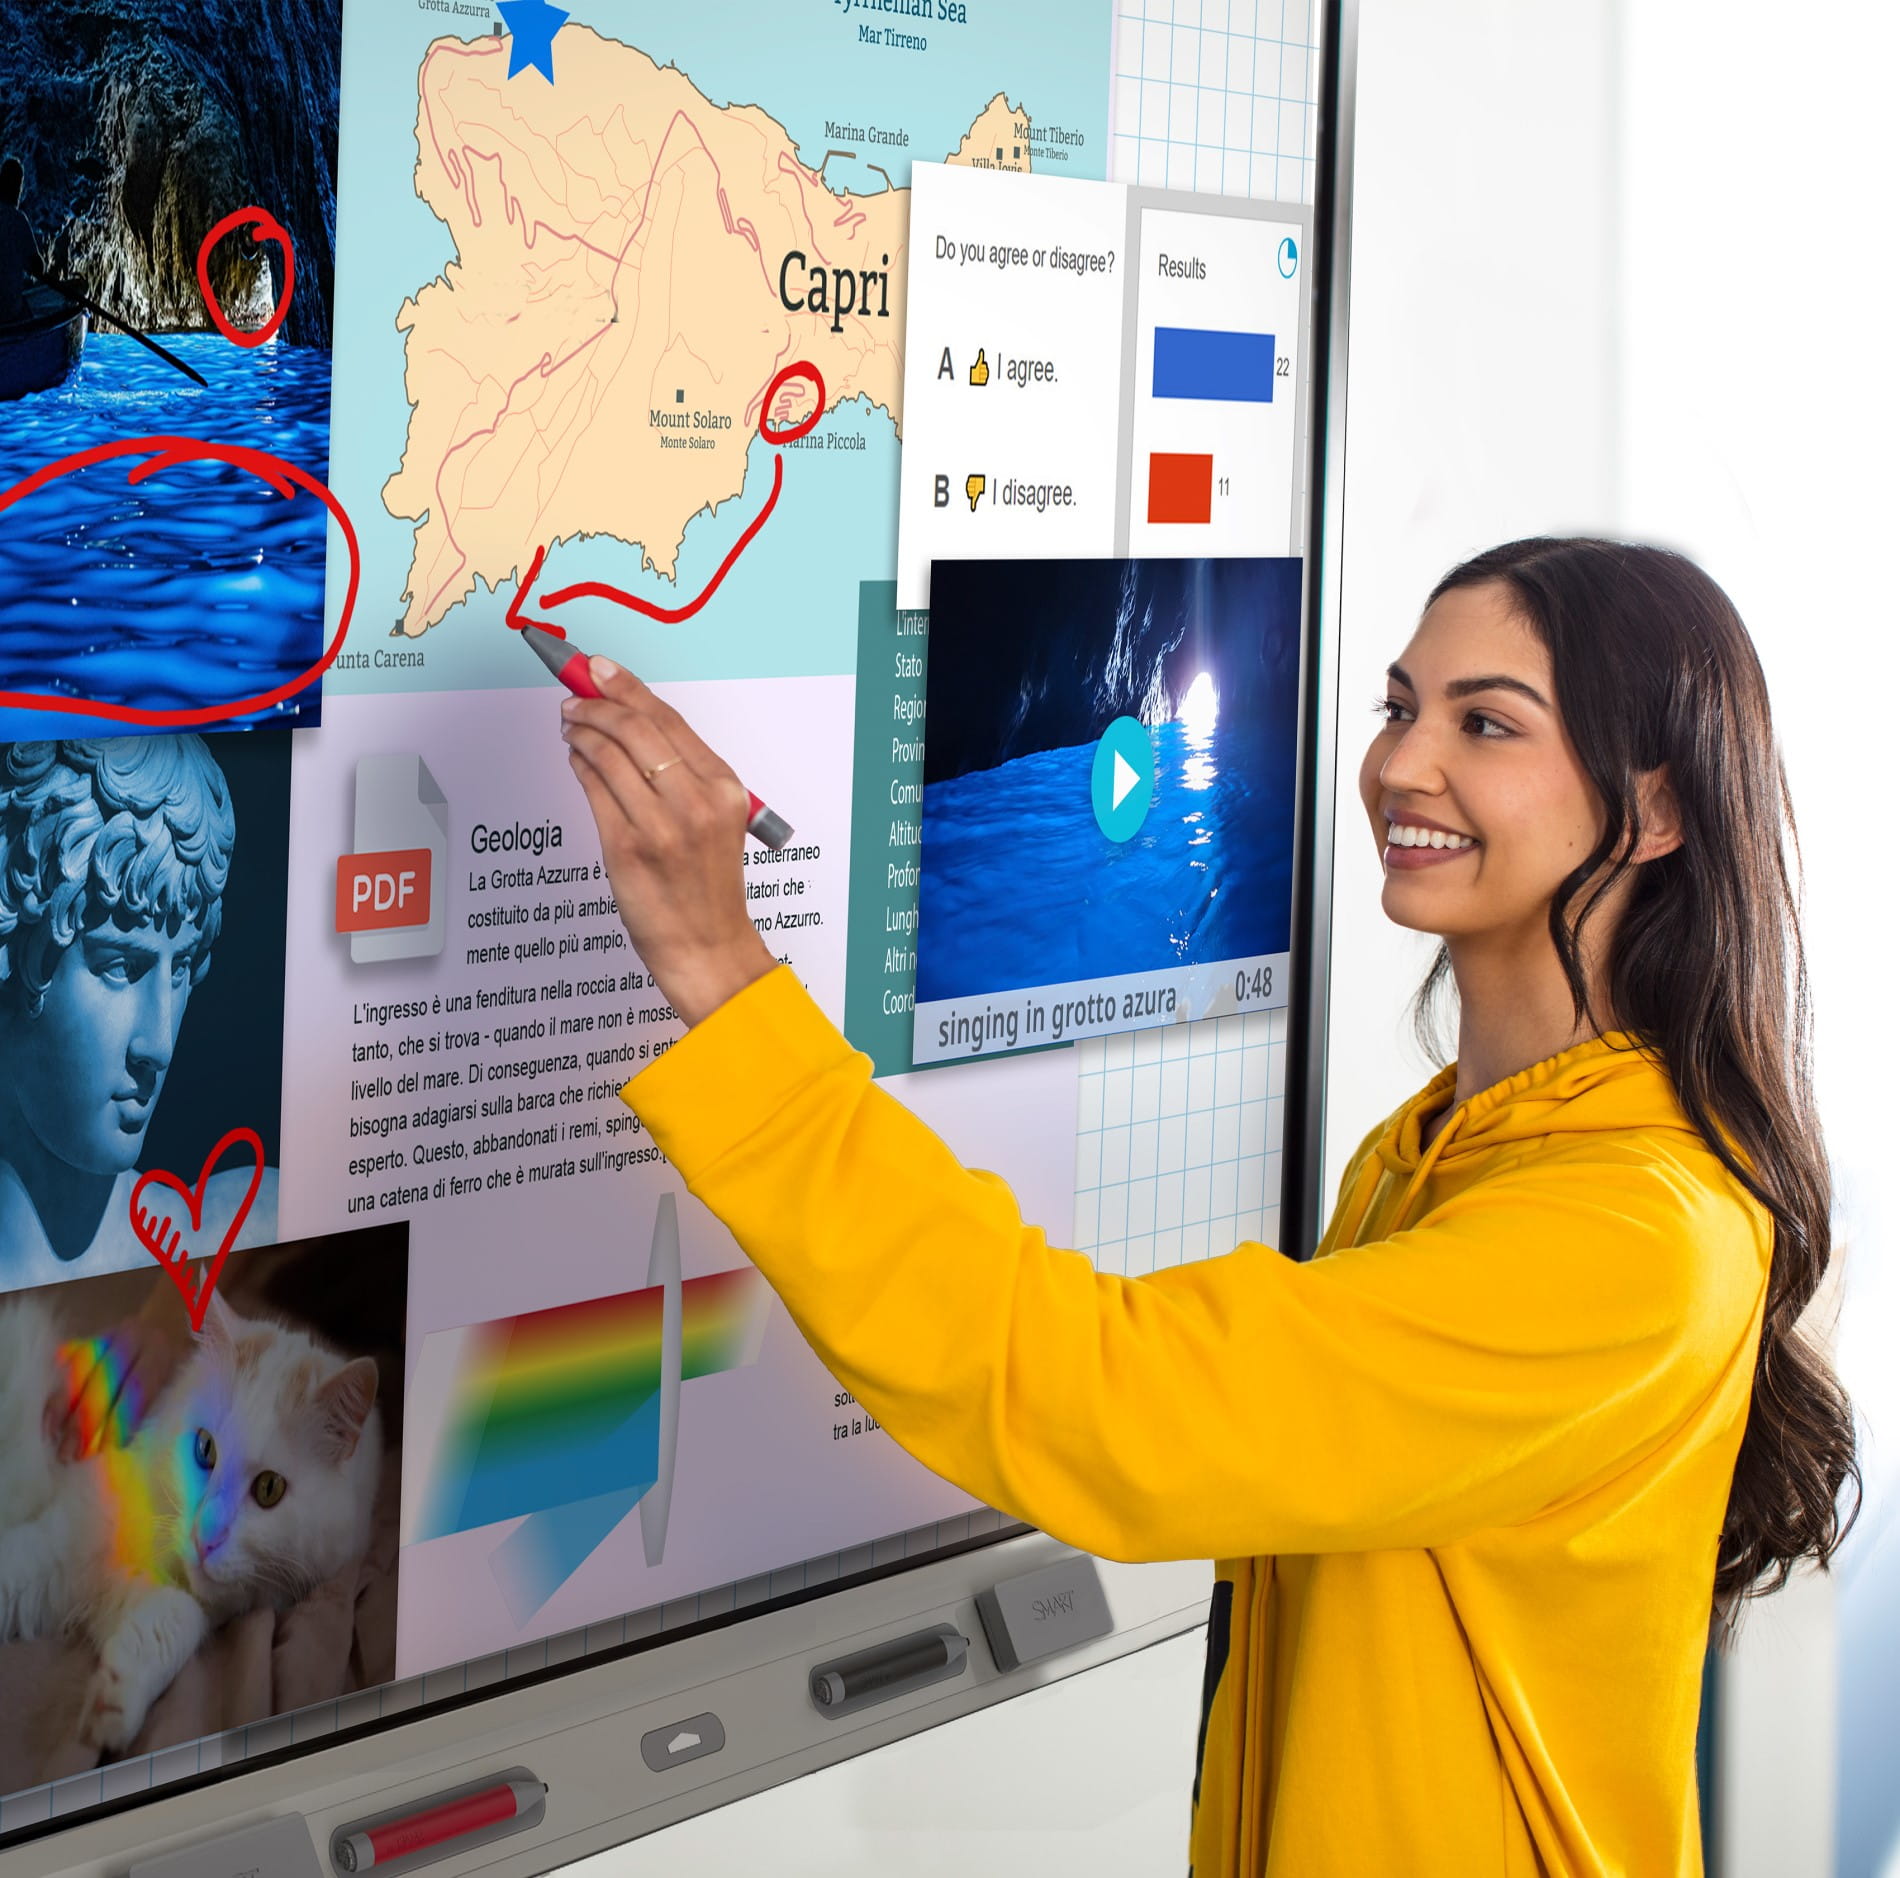 SMART Interactive Displays  See The Newest Lineup From The World Leader In  Interactive Technology